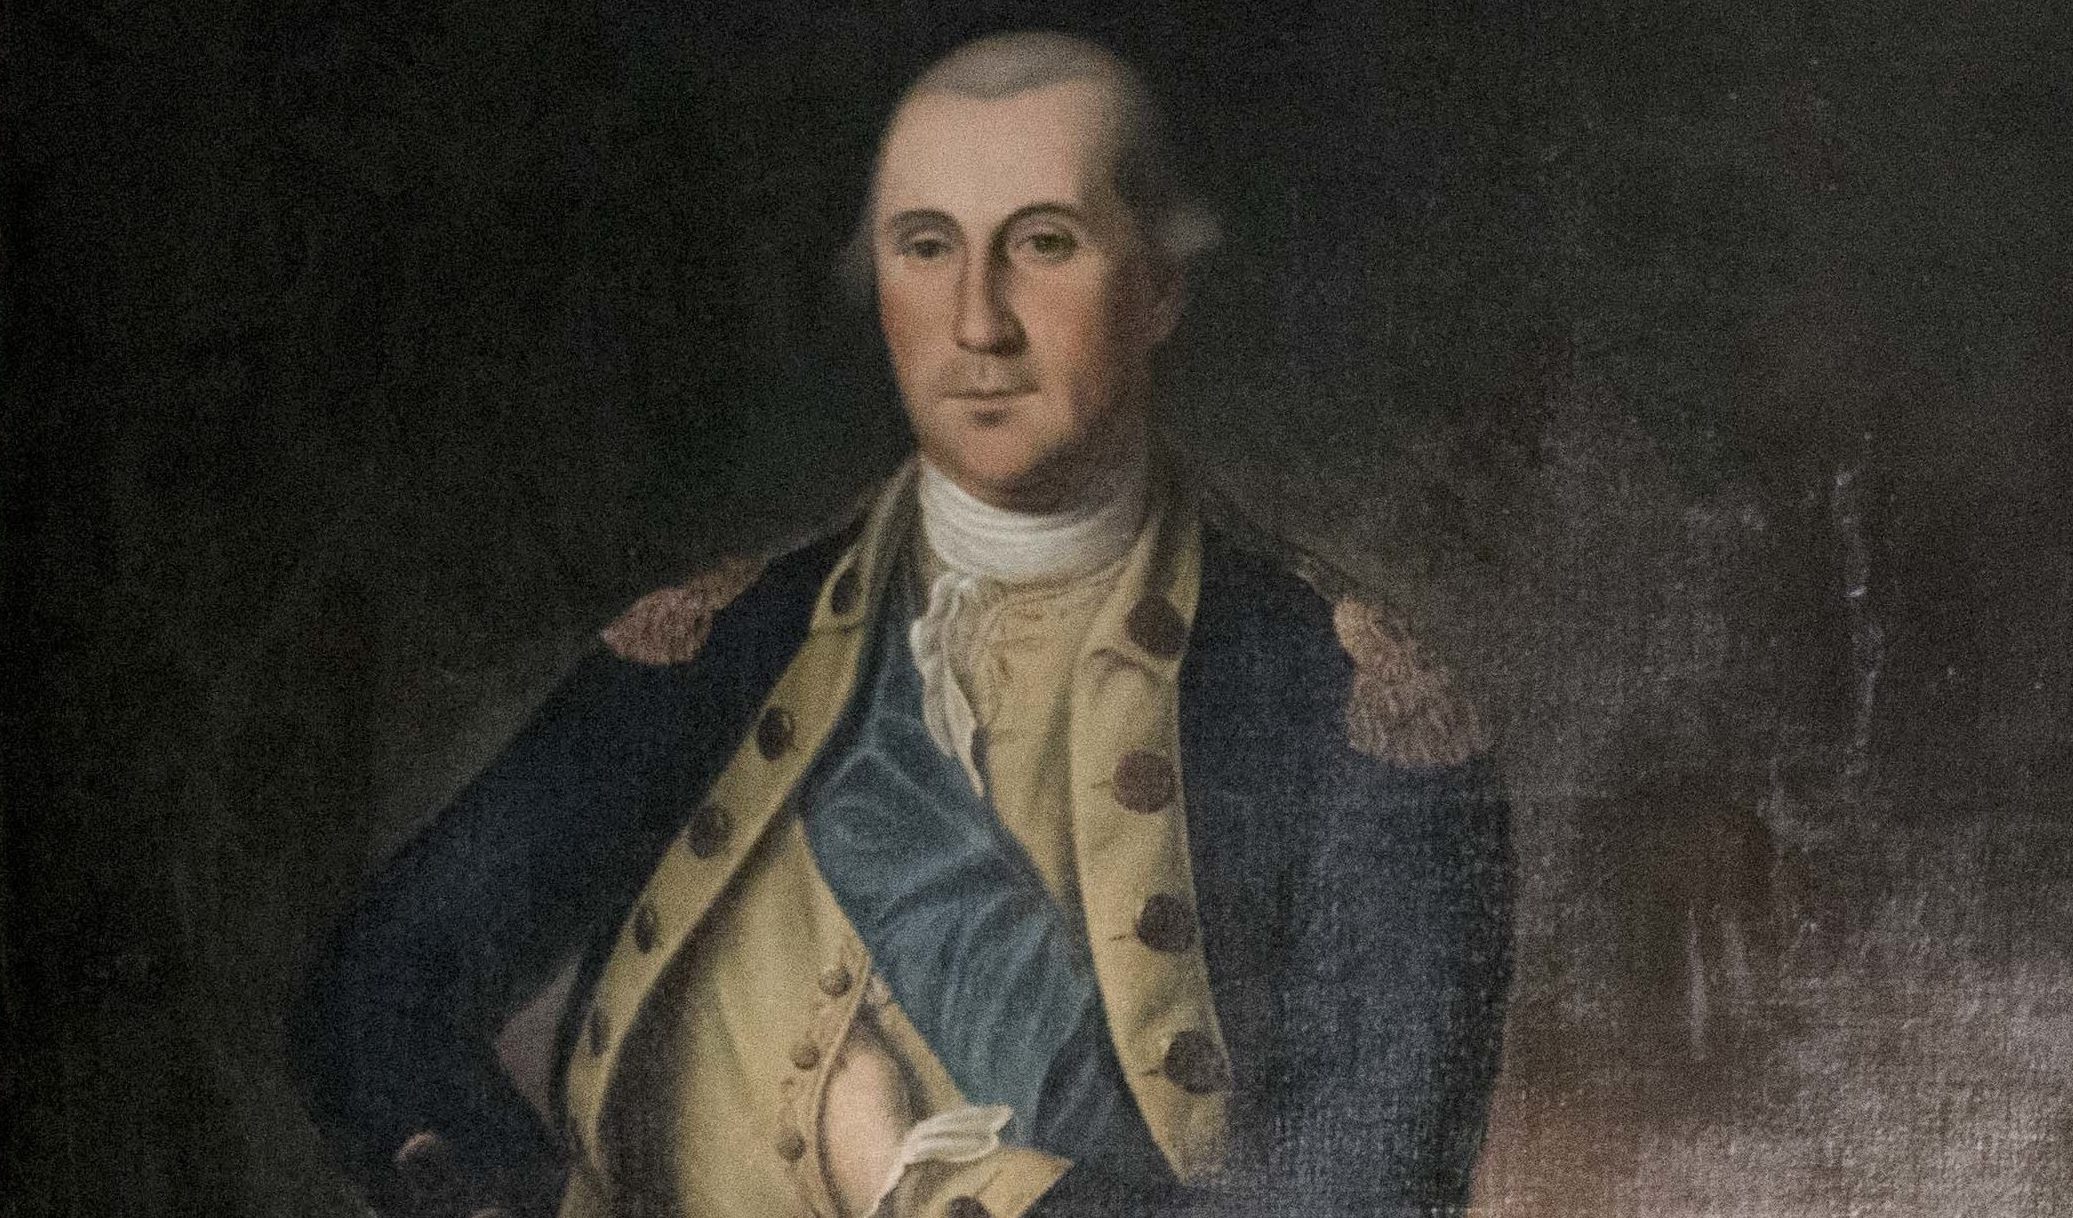 President Washington’s first biographer leaves behind contested anecdotes